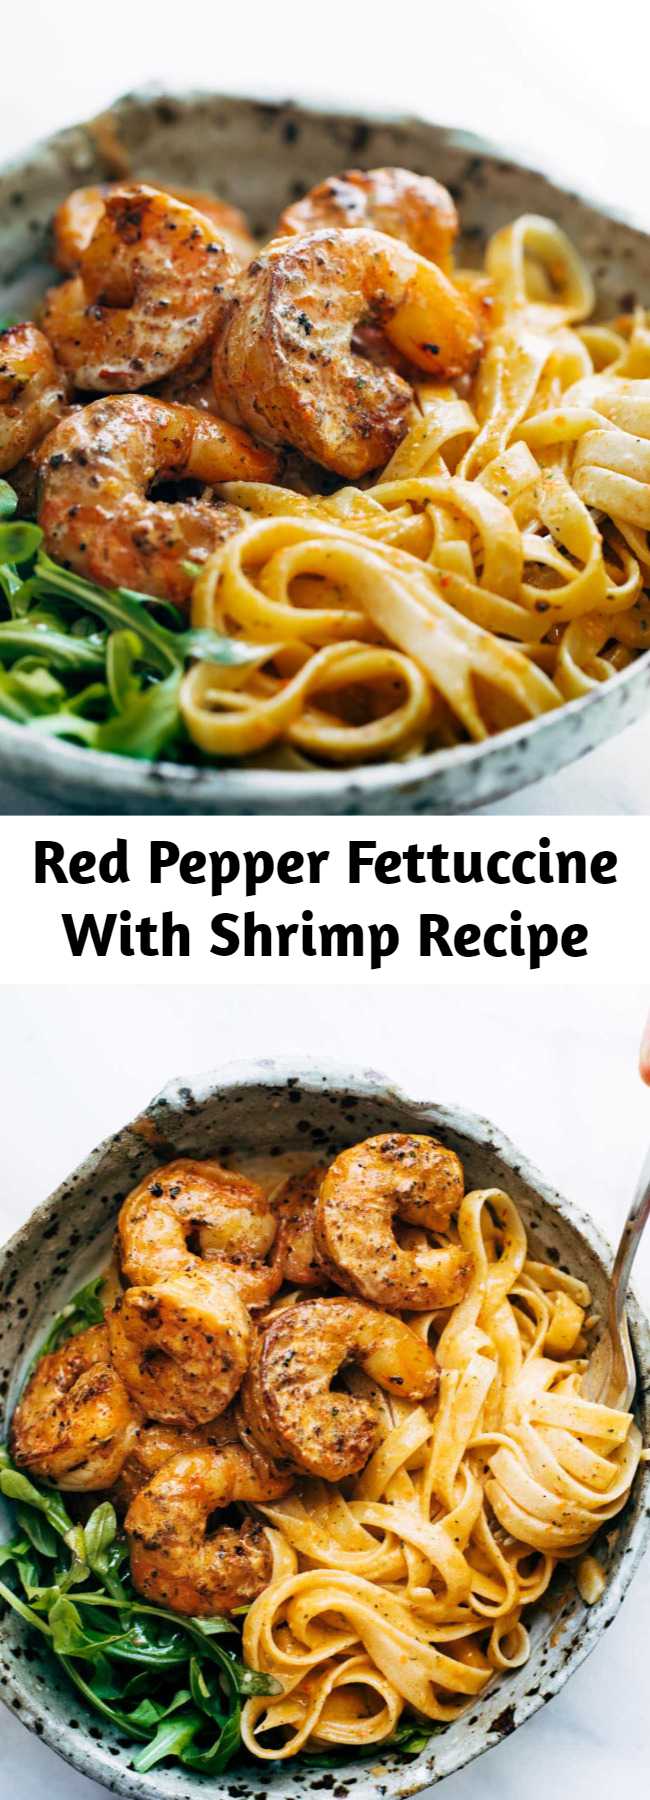 Red Pepper Fettuccine With Shrimp Recipe - Red Pepper Fettuccine with Shrimp! It’s got quick, pan-fried shrimp, creamy noodles, and red pepper / garlic / butter / lemon-ish sauce vibes. Perfect quick and easy dinner!